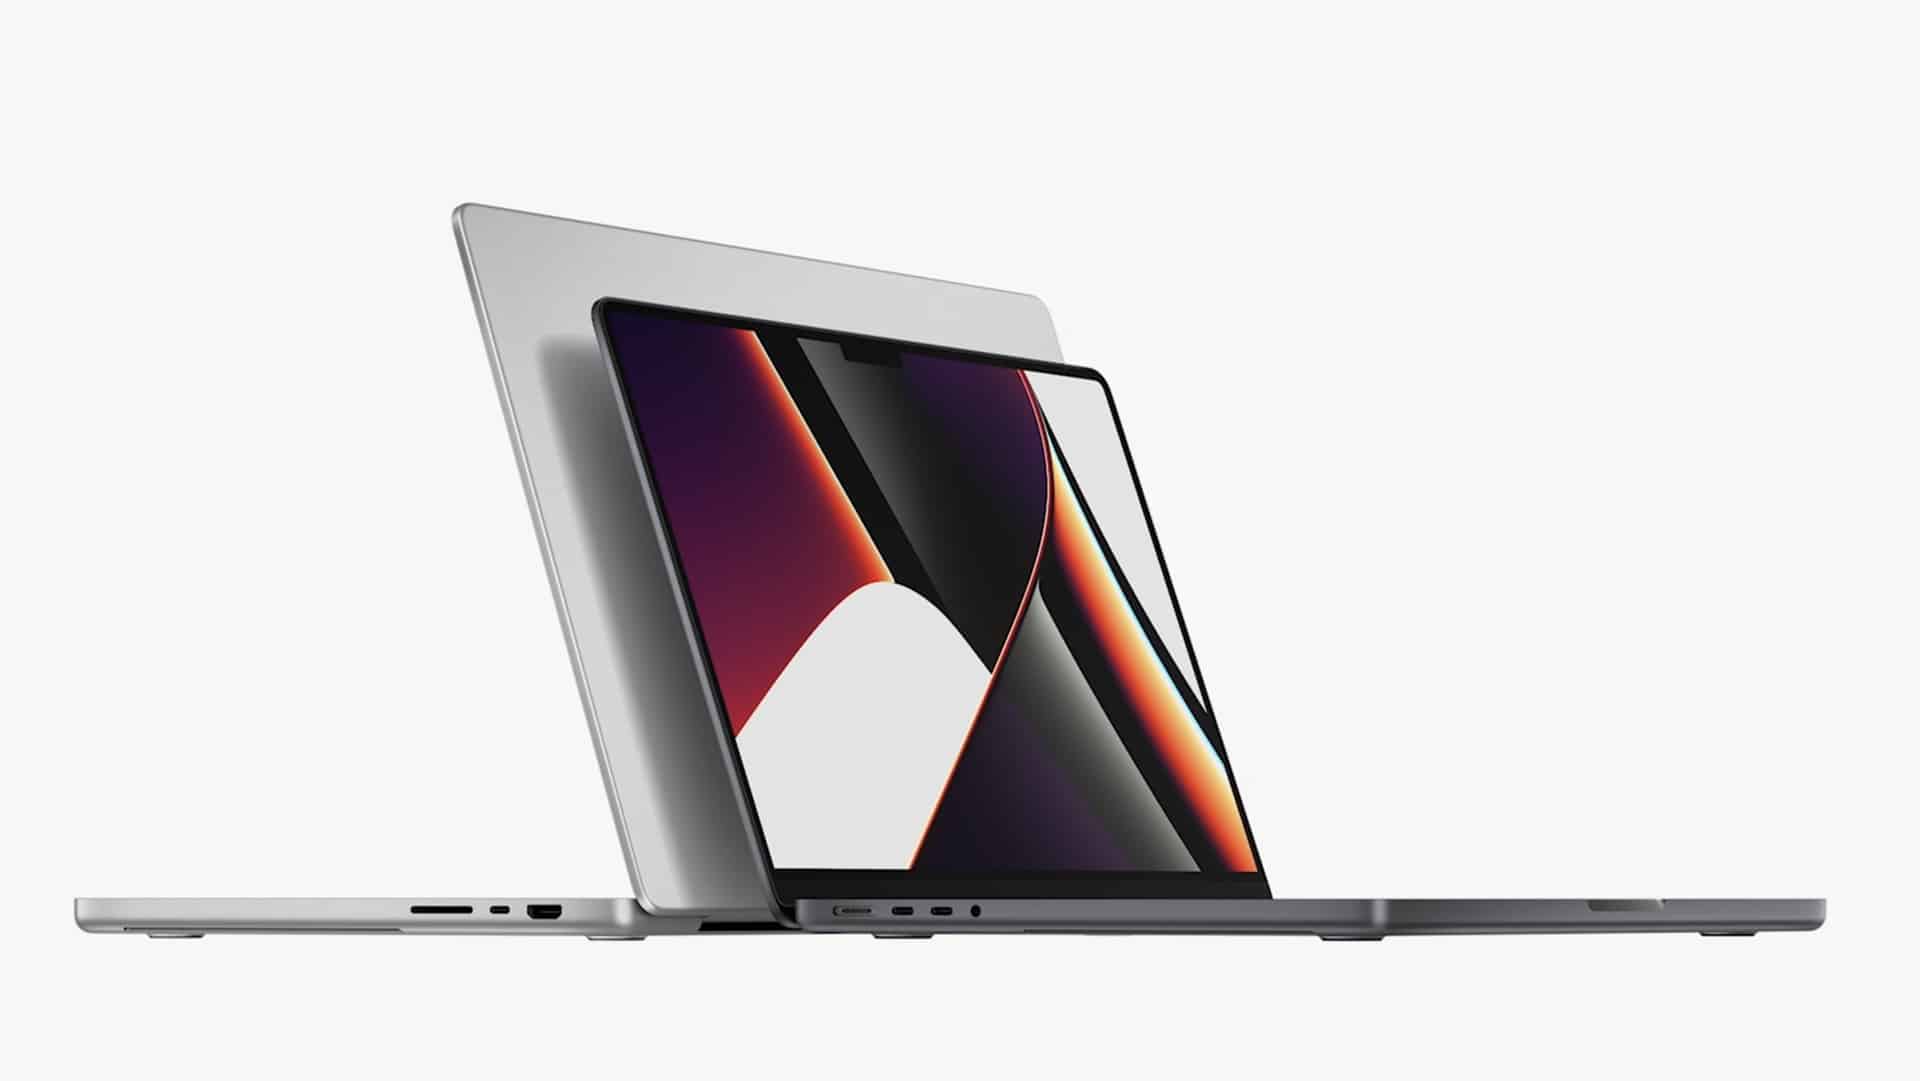 Apple MacBook Pro with M1 Pro and M1 Max chipsets launched: Specs, price and more